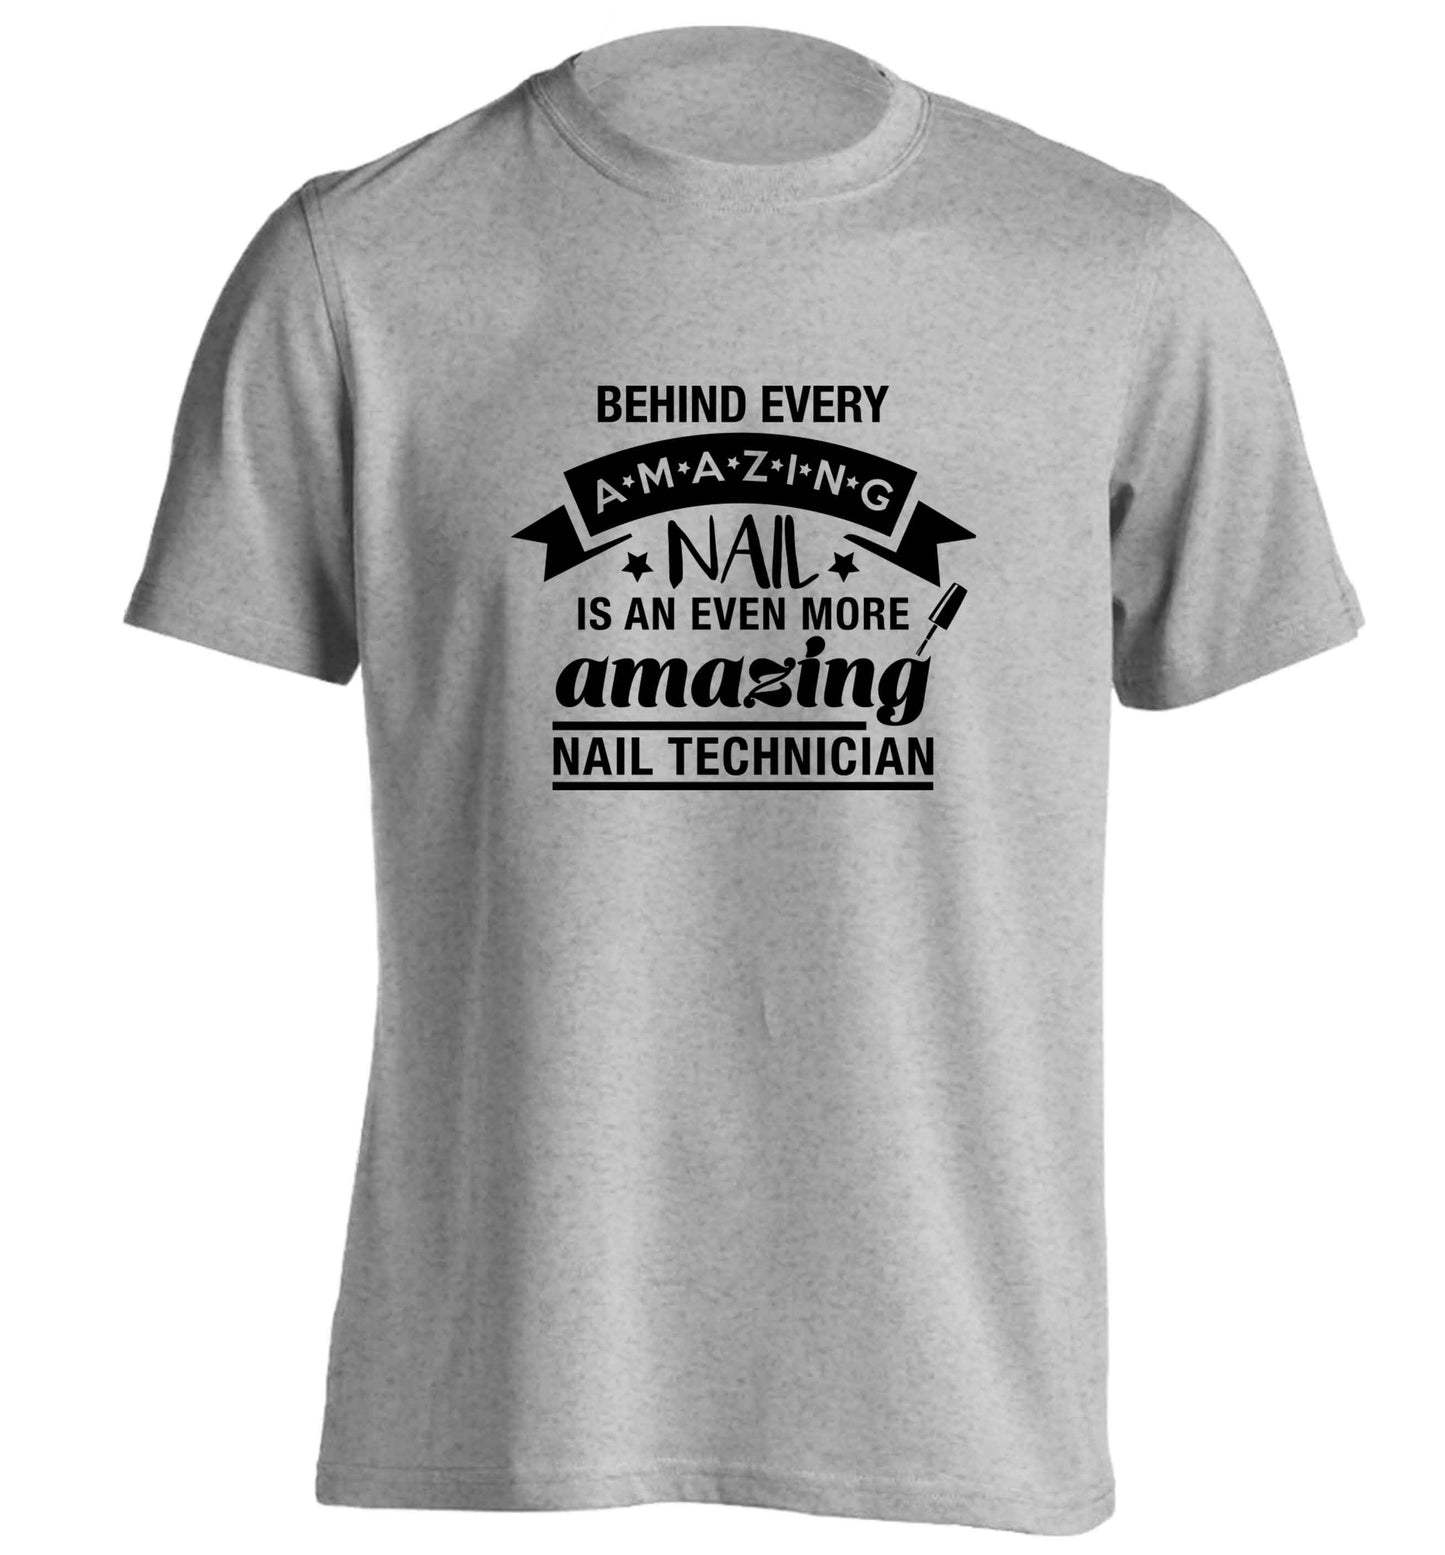 Behind every amazing nail is an even more amazing nail technician adults unisex grey Tshirt 2XL